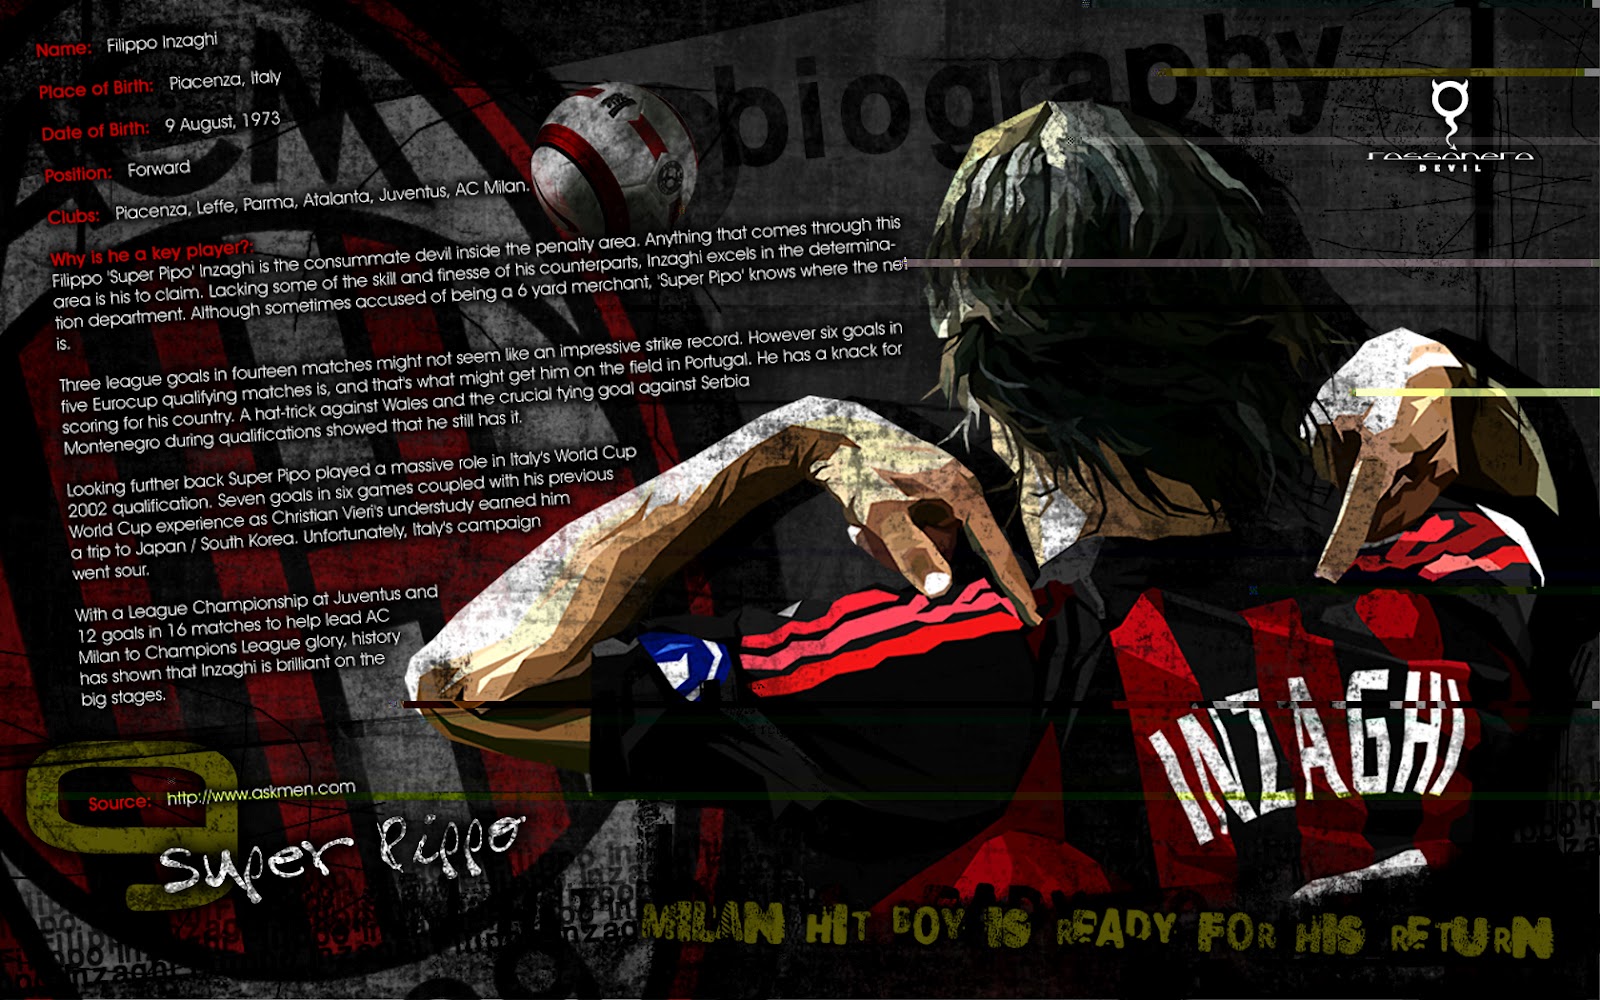 http://2.bp.blogspot.com/-hbHrghWqSGY/T8L1a1rAywI/AAAAAAAACxI/O6LsZrov6gk/s1600/Superpippo_by_RossoneroDevil.jpg